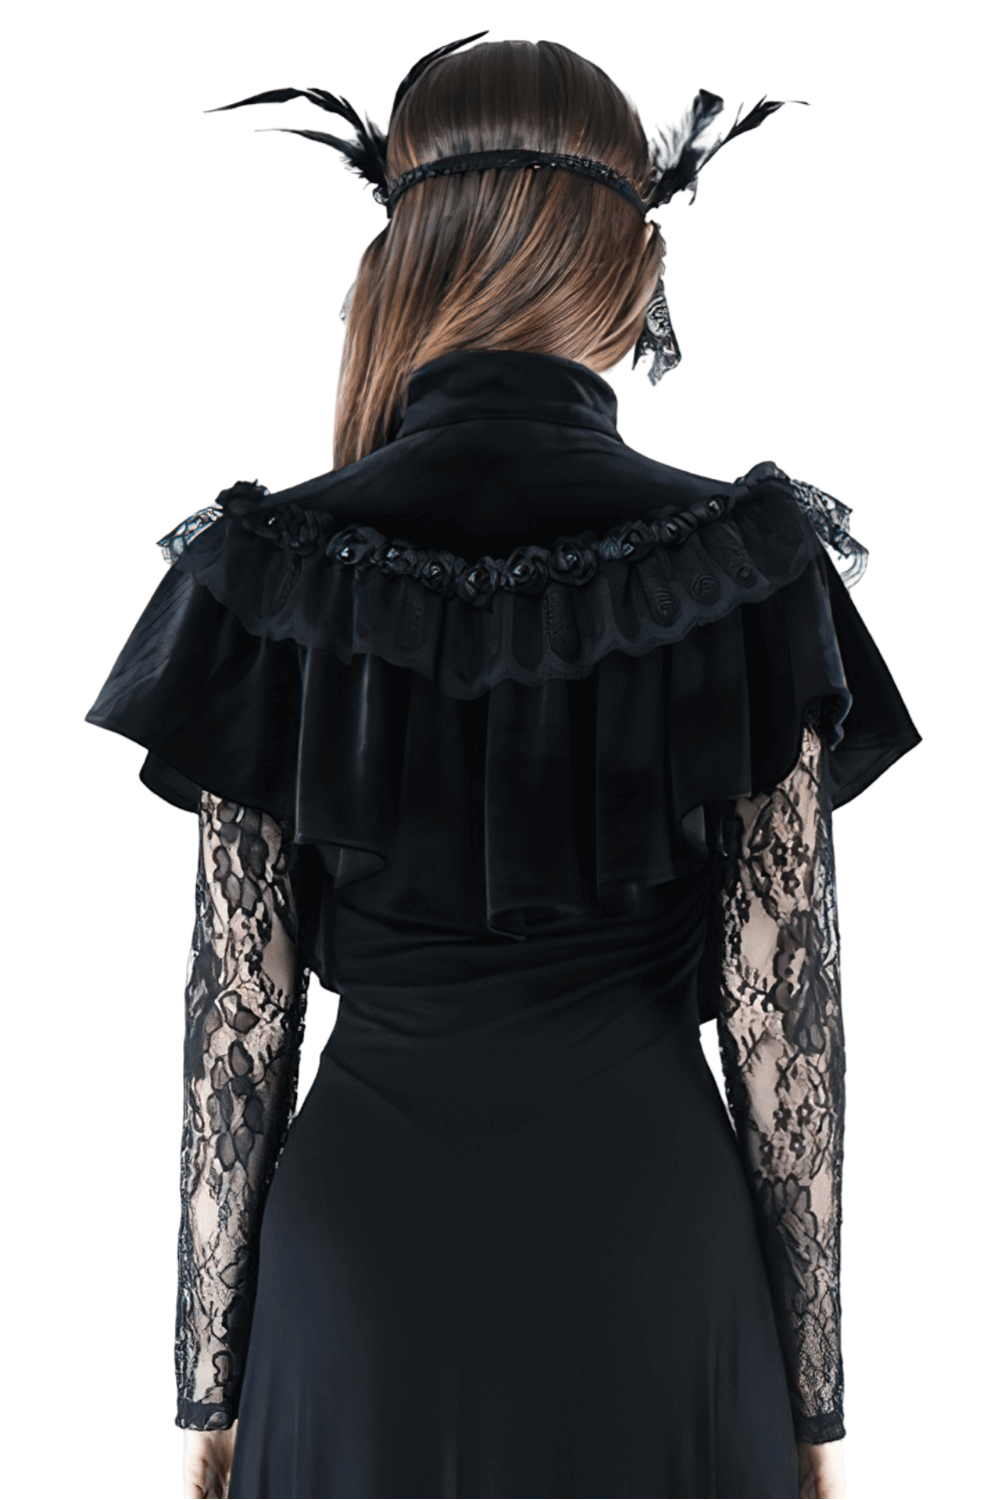 Vintage Gothic Velvet Capelet with Lace and Pearls